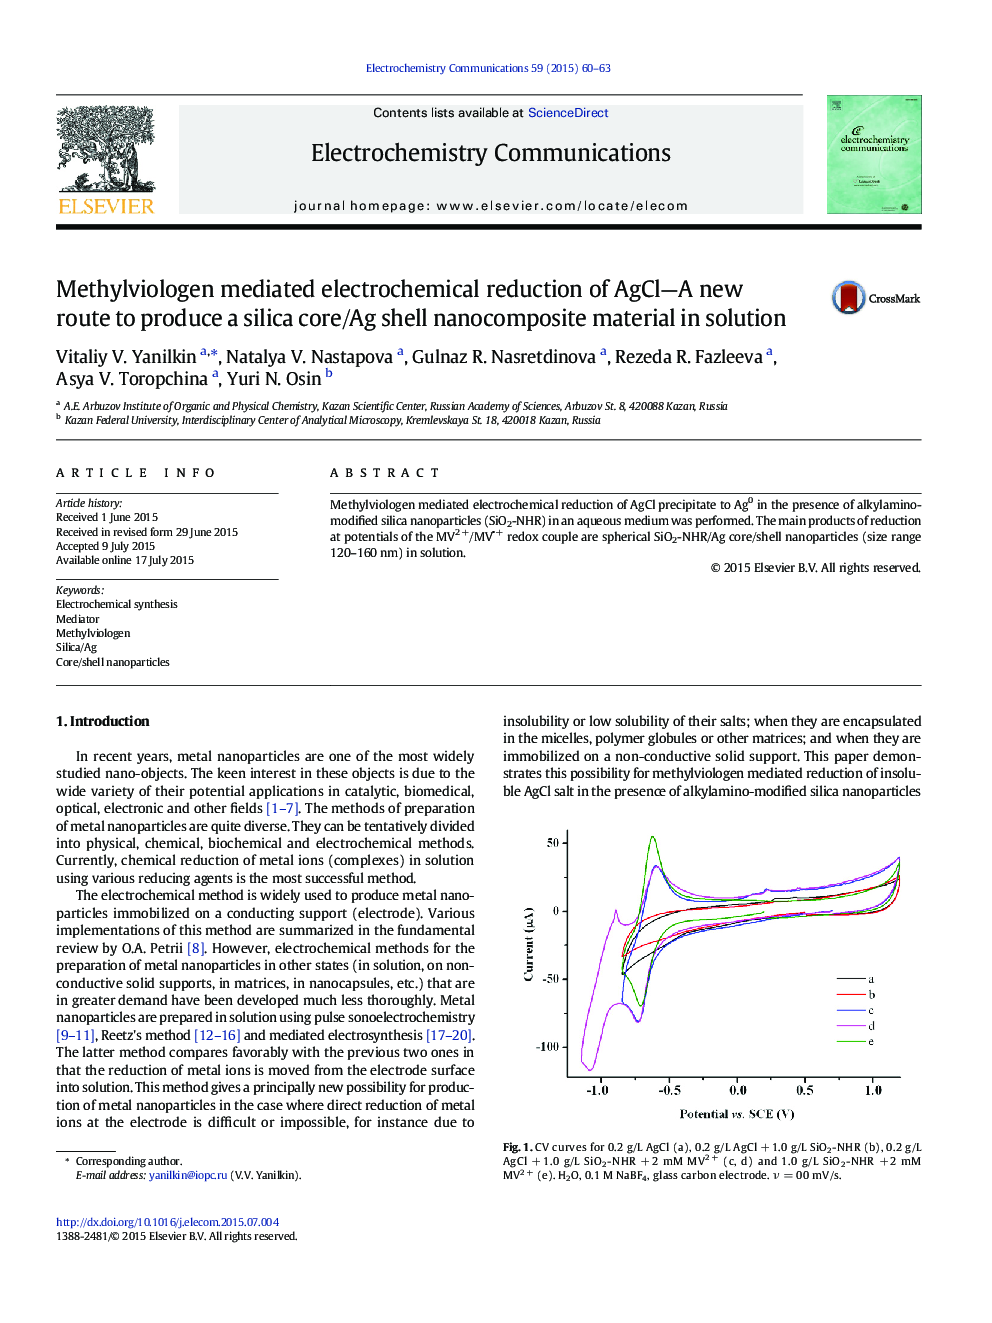 Methylviologen mediated electrochemical reduction of AgCl—A new route to produce a silica core/Ag shell nanocomposite material in solution